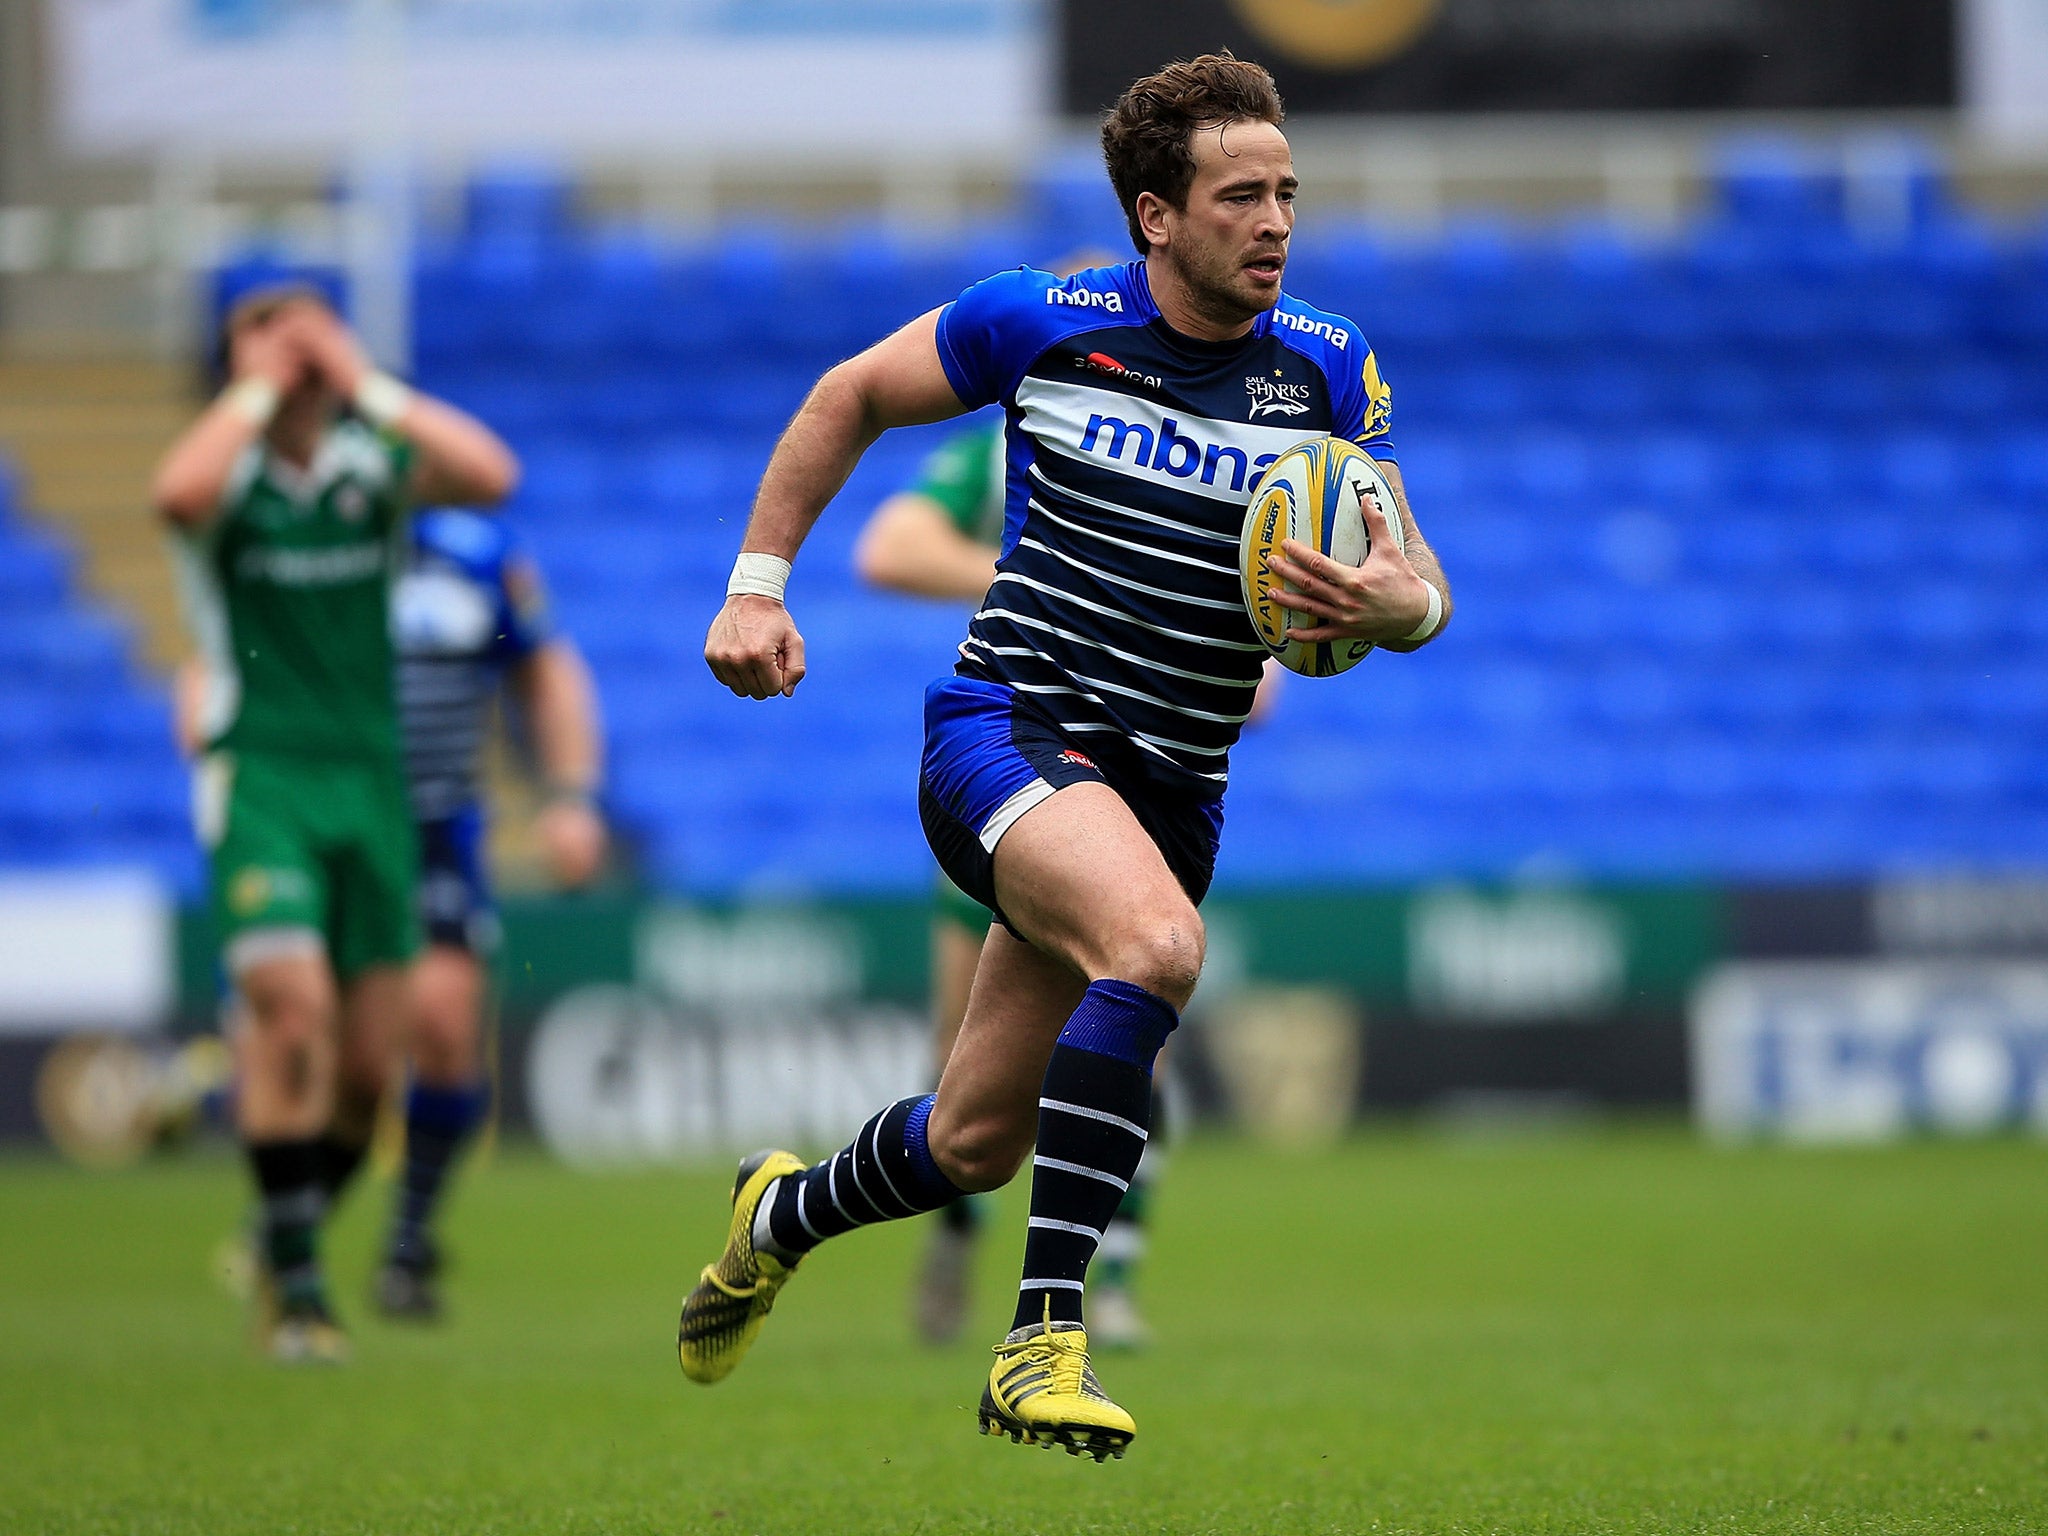 Danny Cipriani's interception try secured the win for Sale Sharks